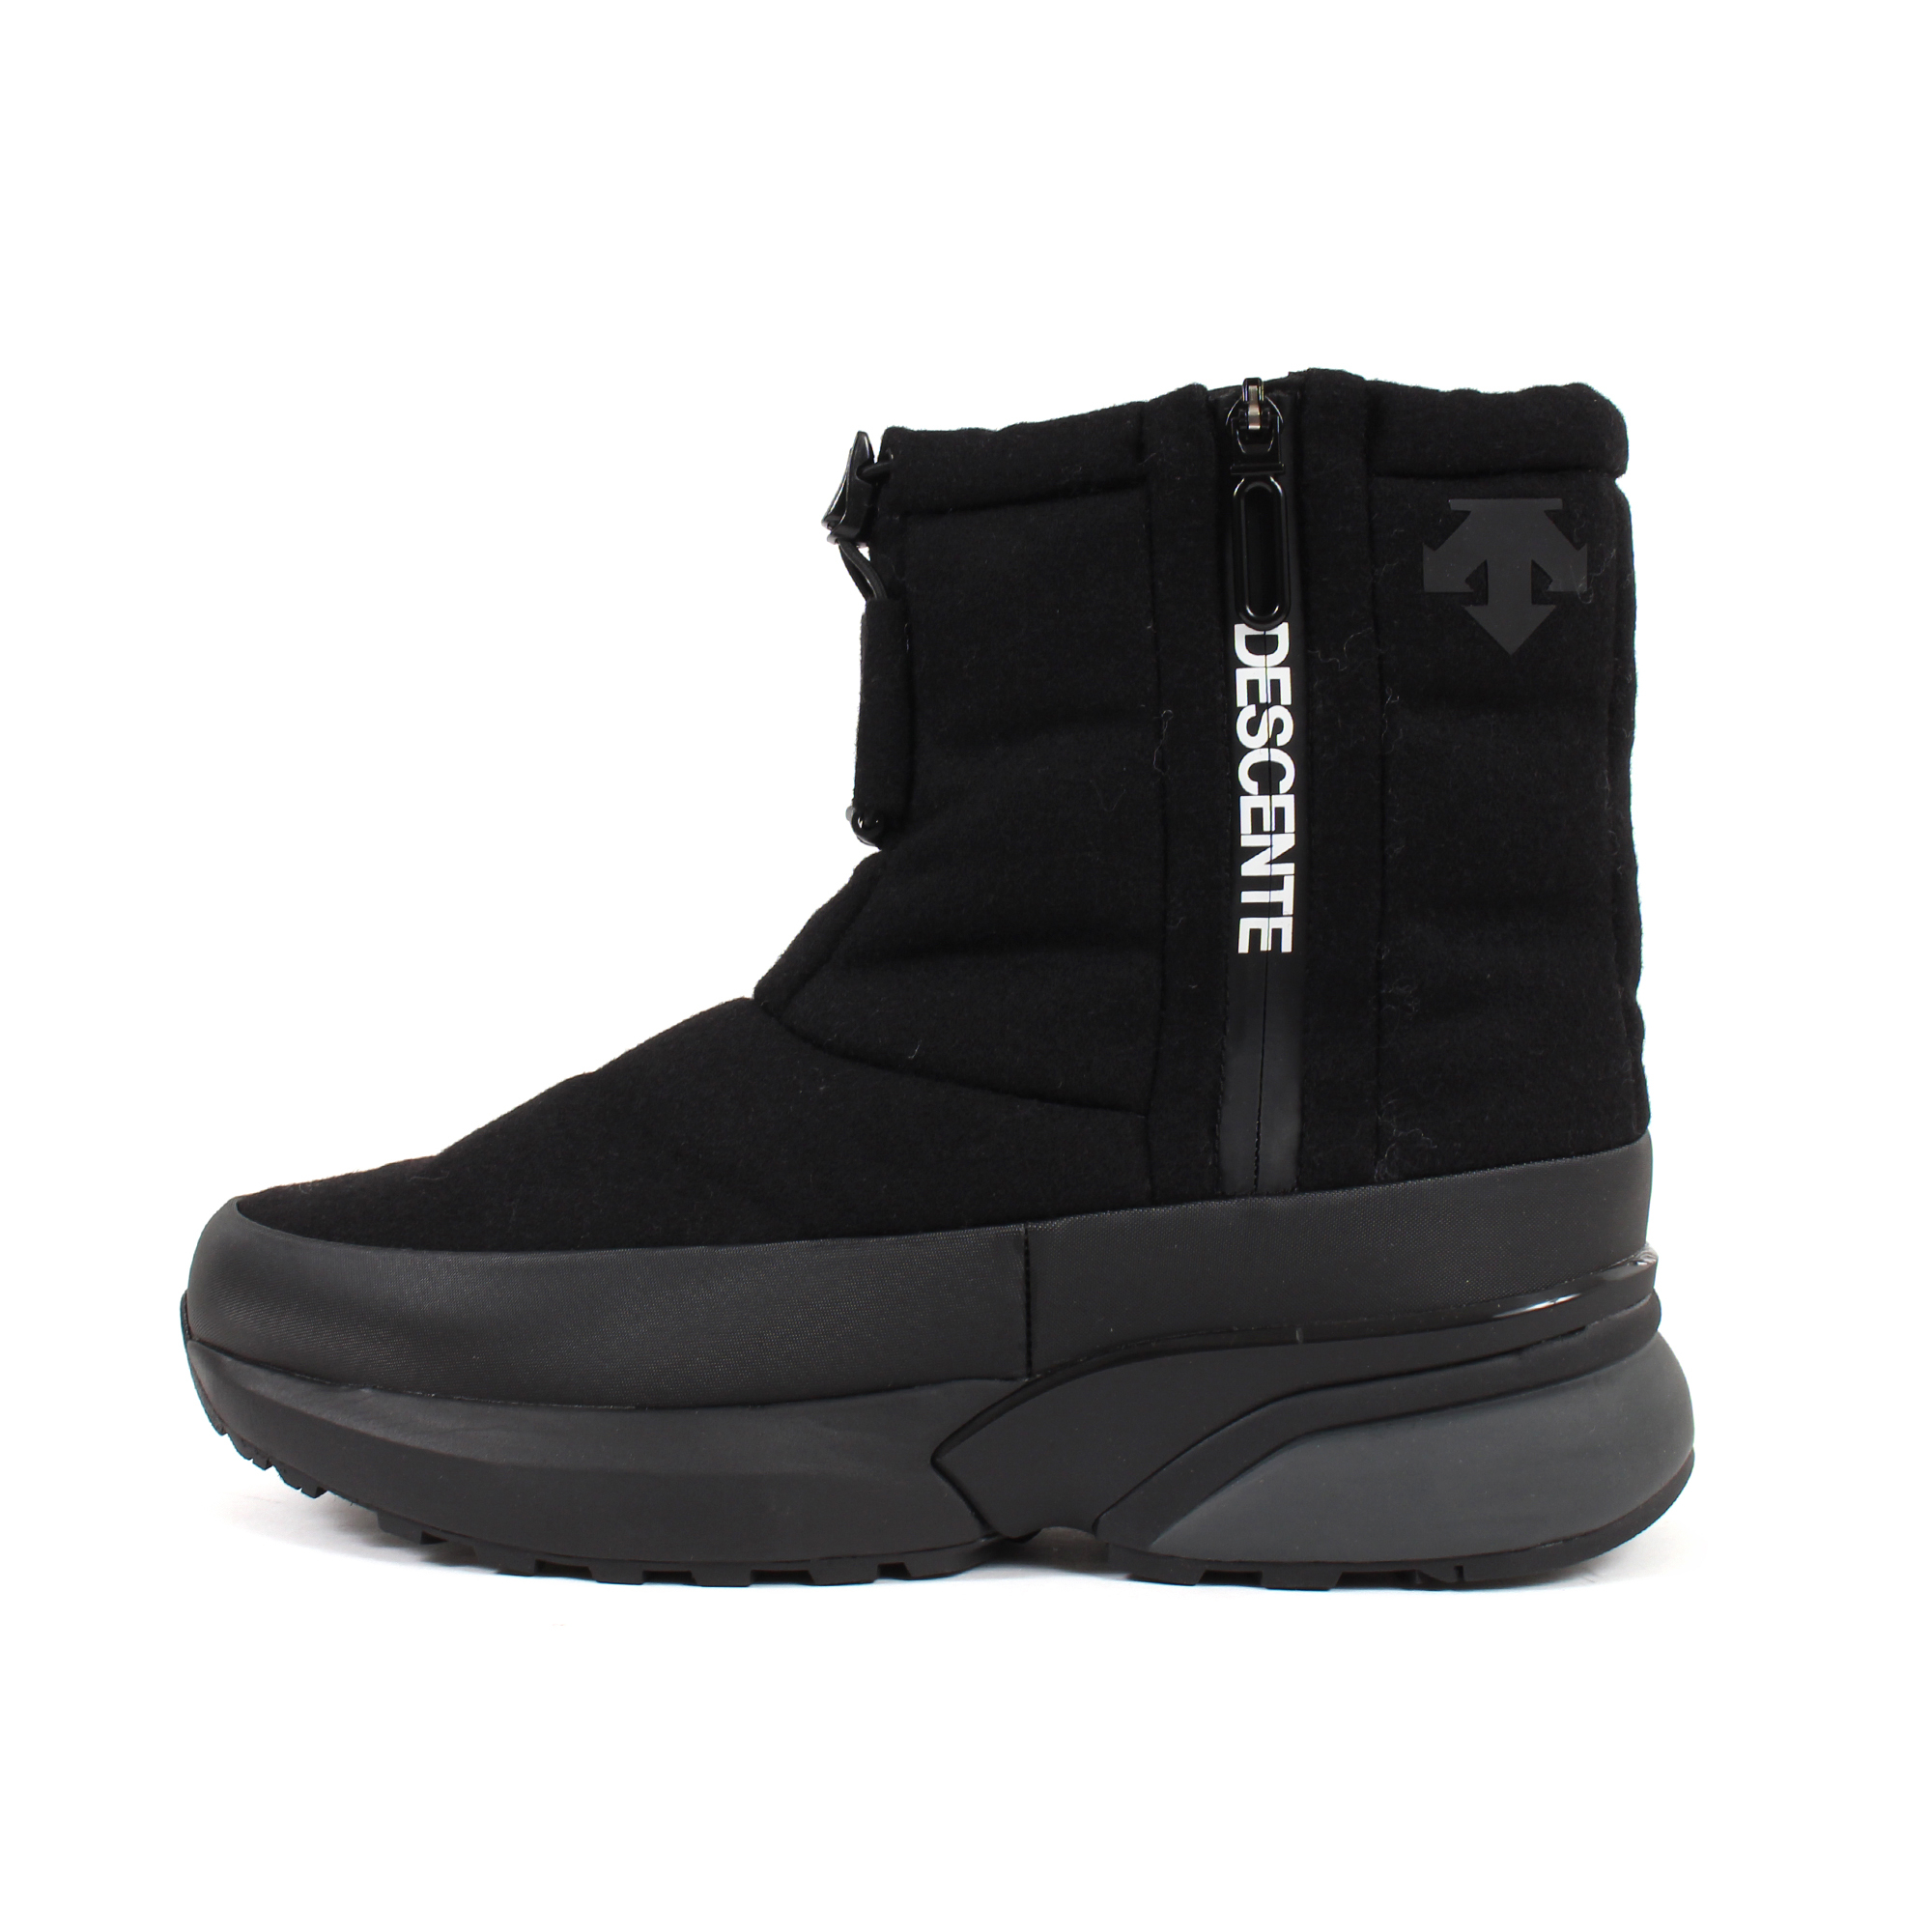 DESCENTE デサント ACTIVE WINTER BOOTS アクティブウィンターブーツ